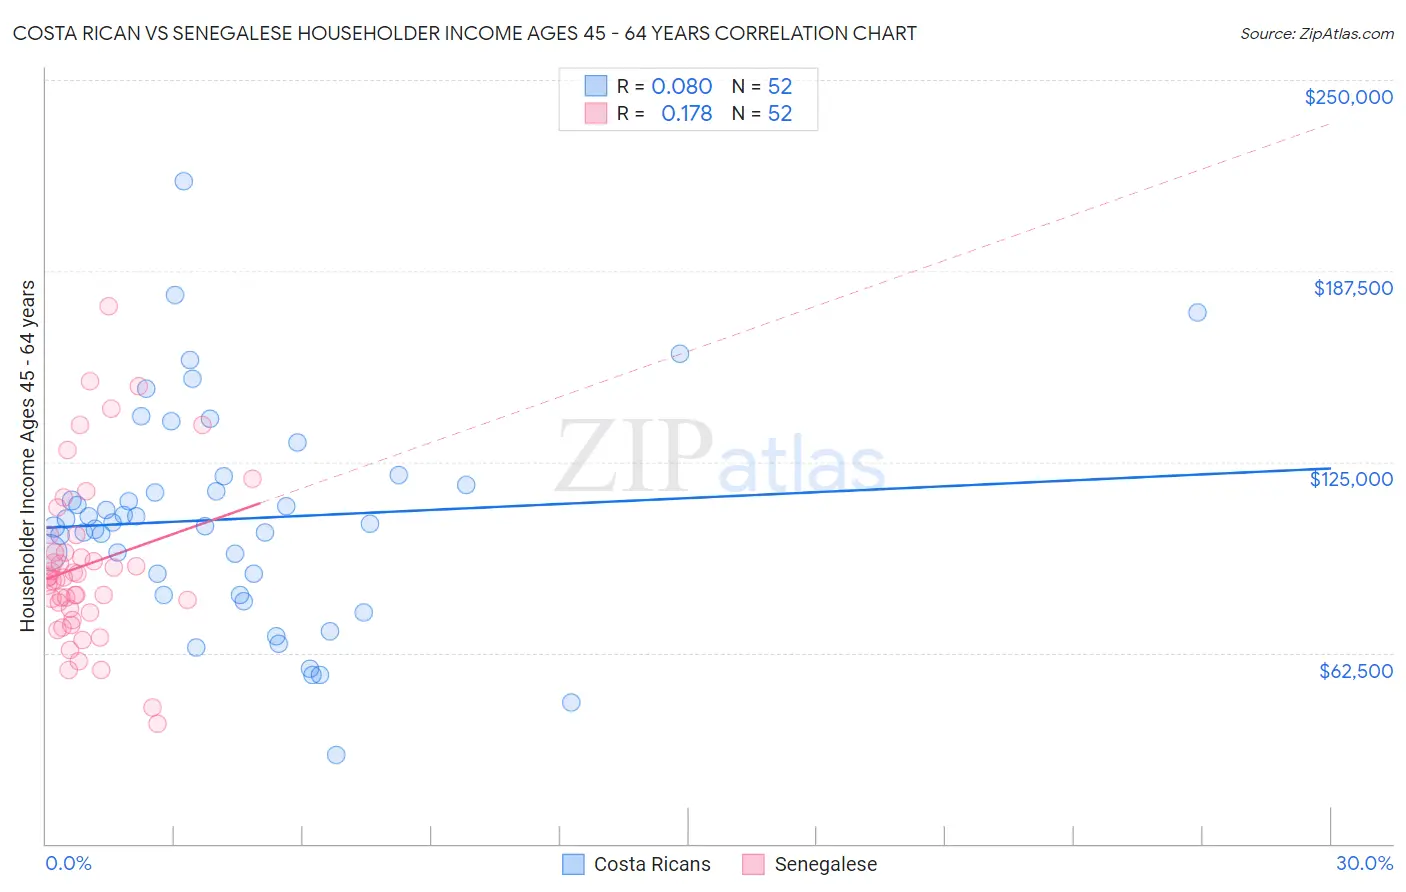 Costa Rican vs Senegalese Householder Income Ages 45 - 64 years